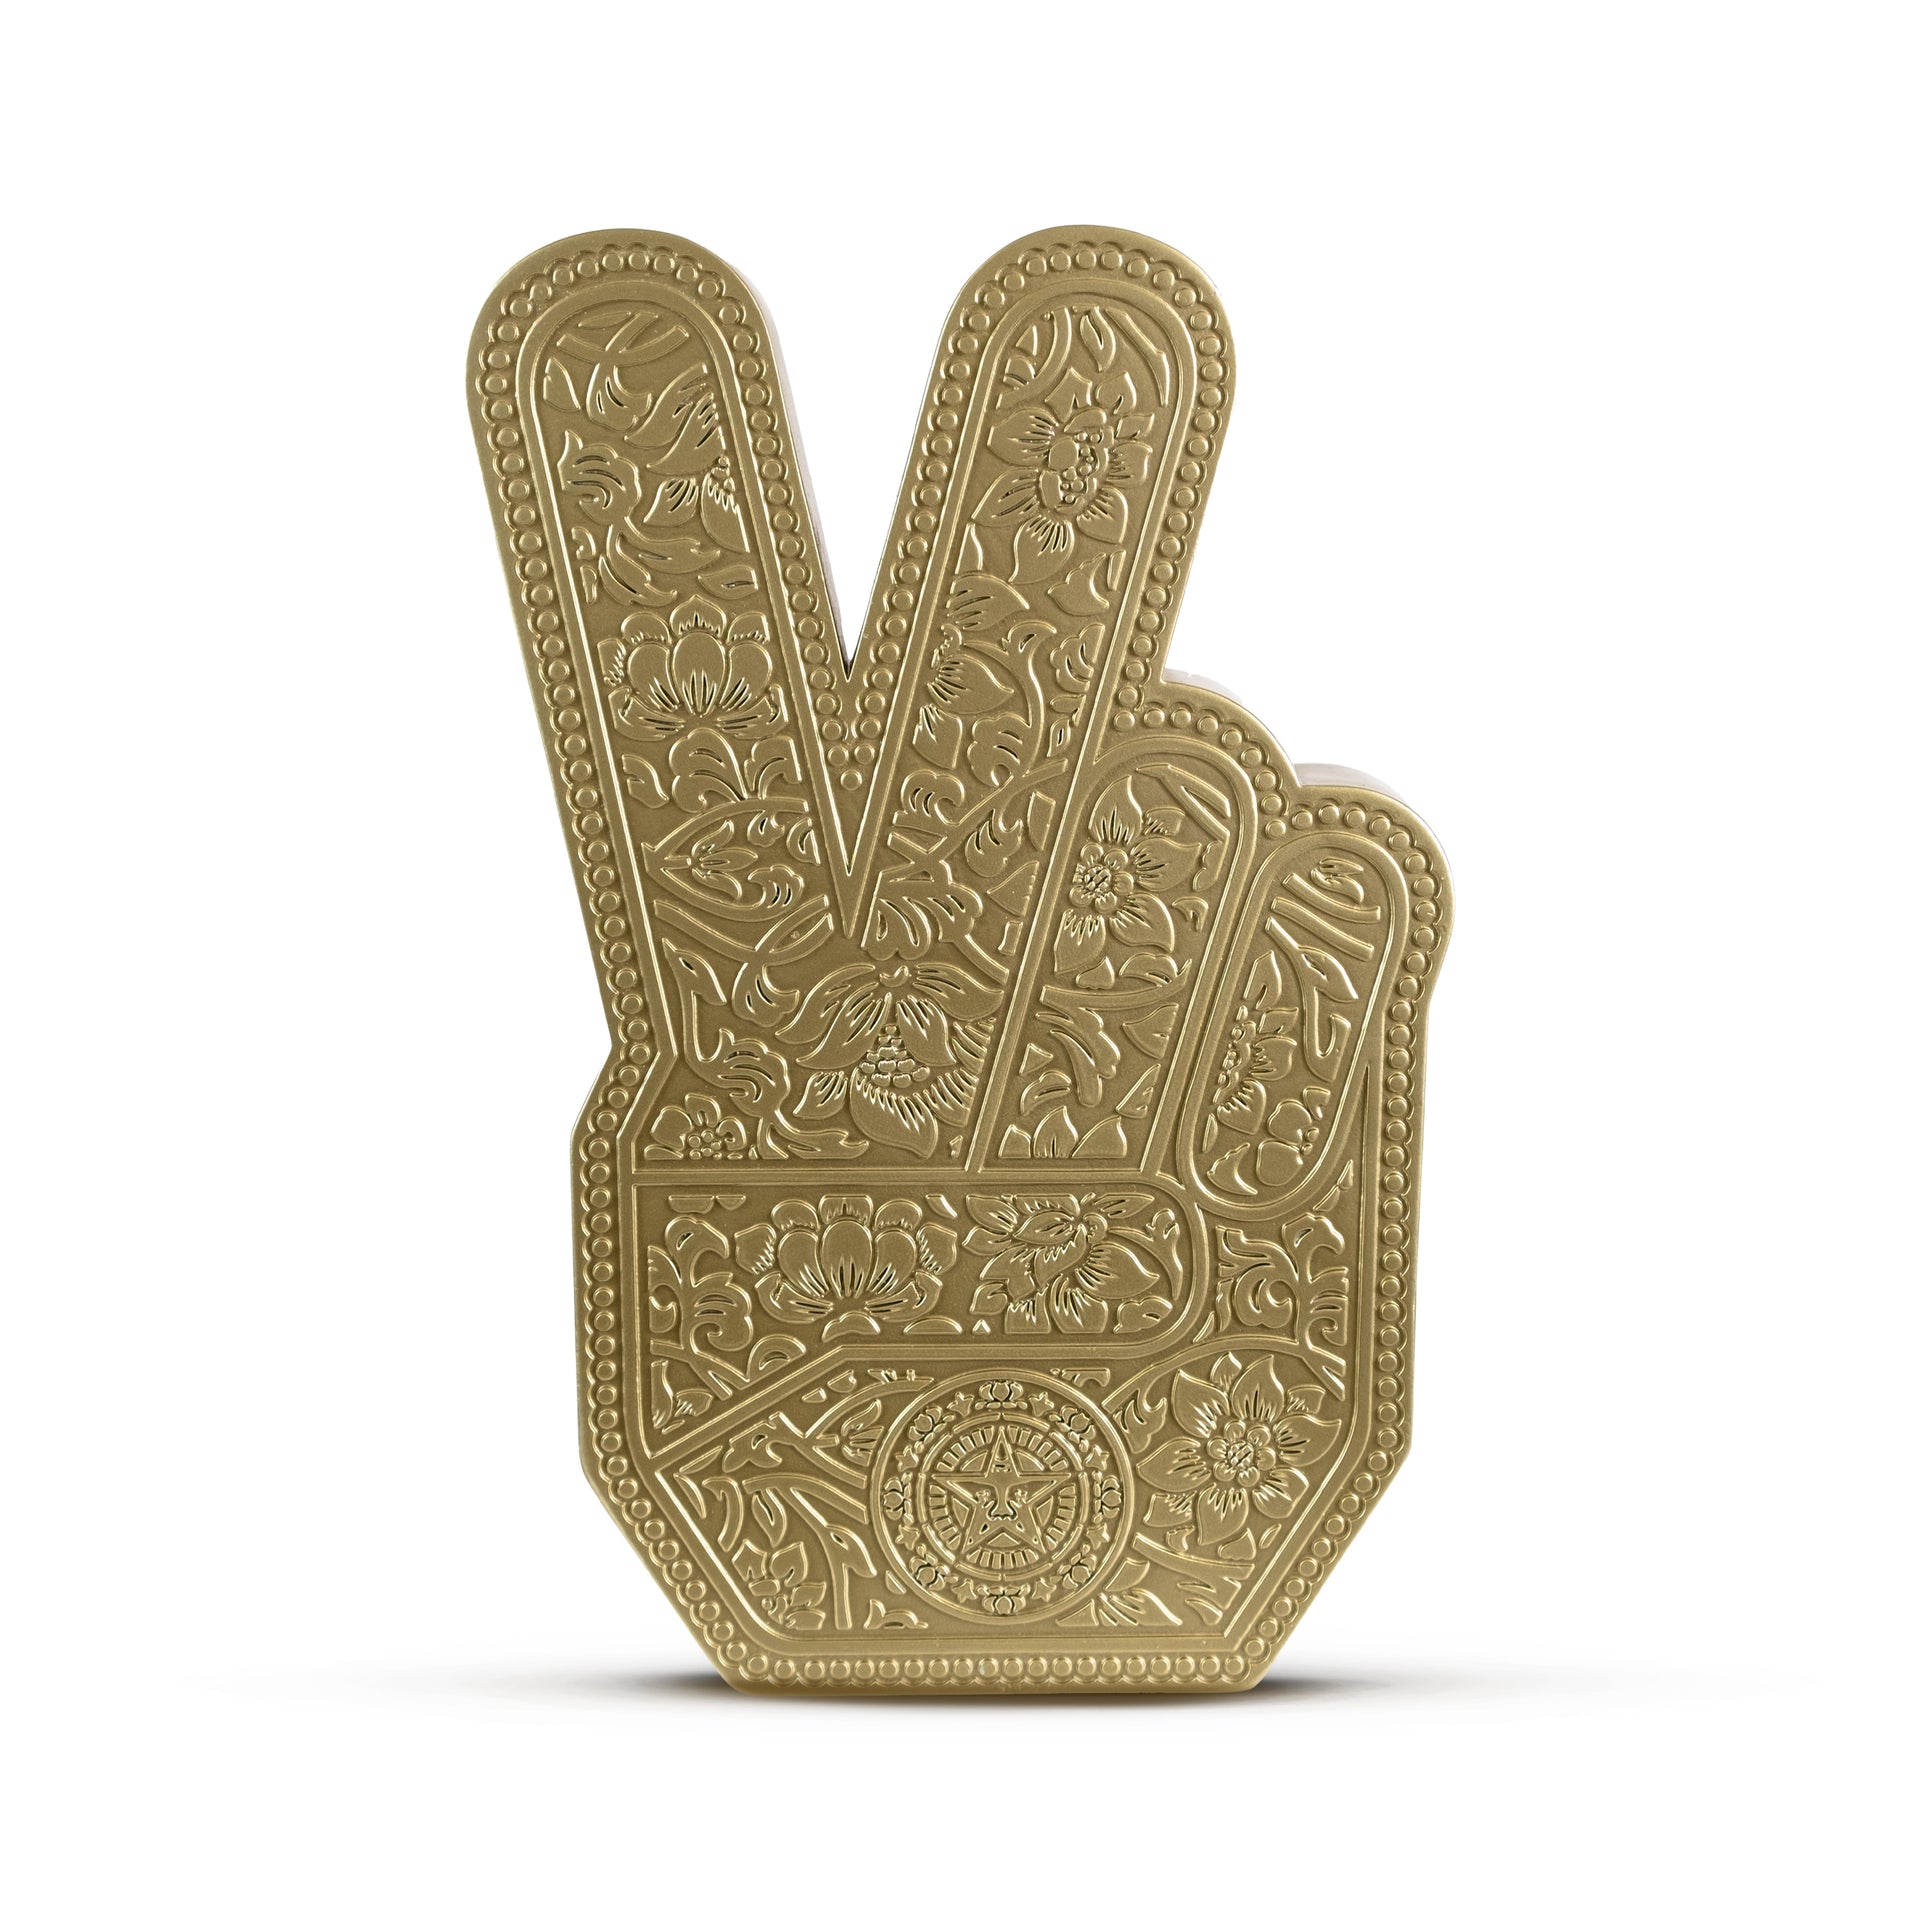 Shepard Fairey "Peace Fingers (Gold)" Collectible